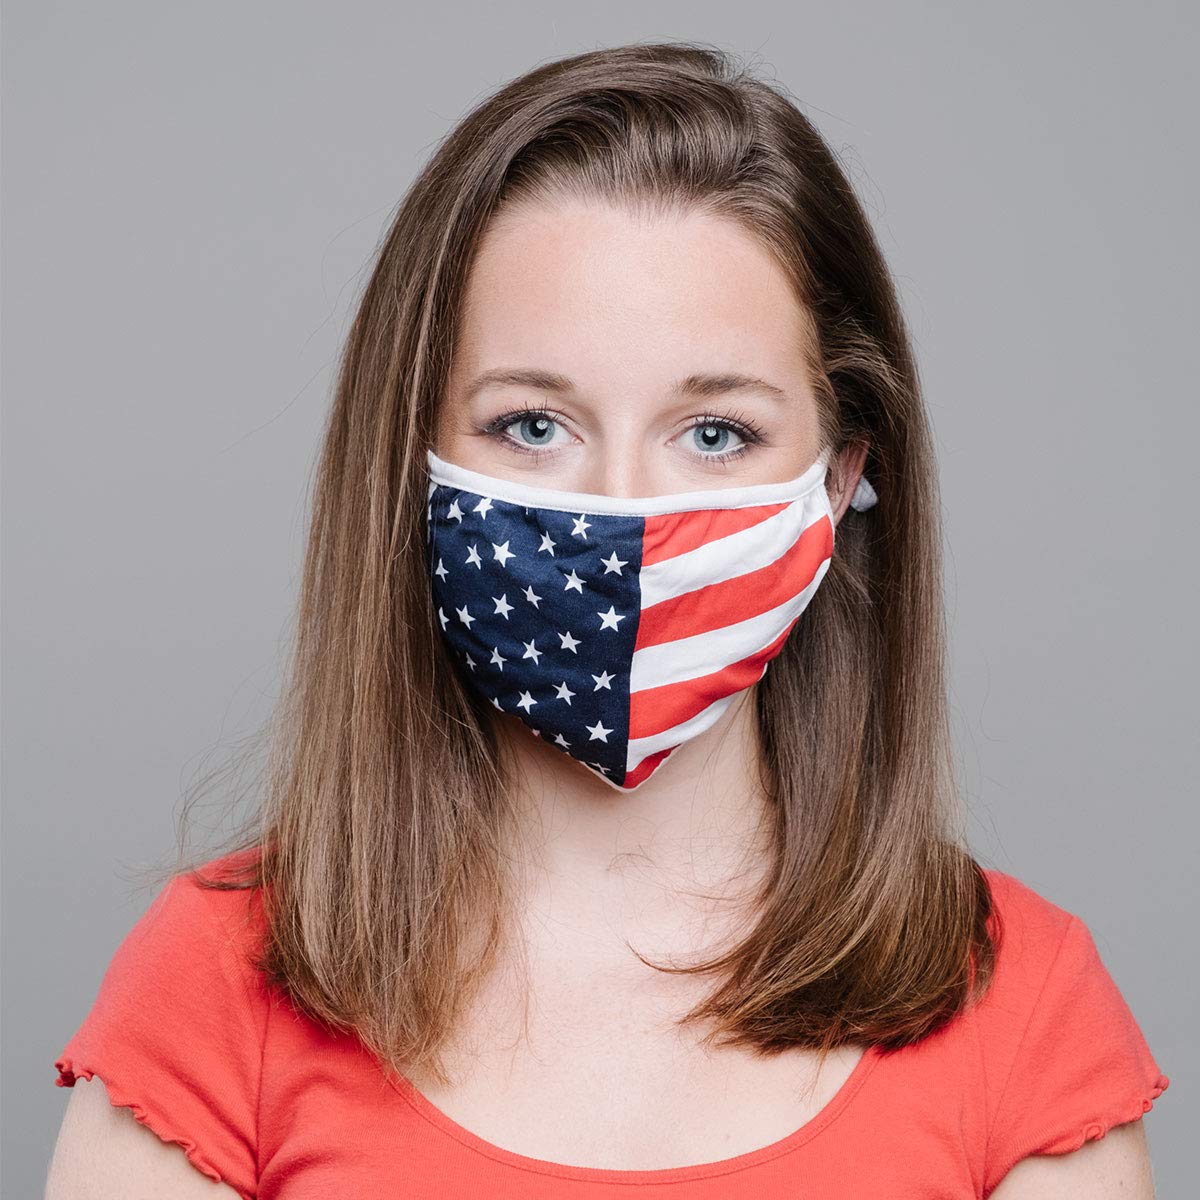 American Mask Group 2-Pack Reusable Washable Cloth Face Masks - Unisex Adult Face Covering With Adjustable Ear Loops - Dual Layer 100% Cotton - Soft & Breathable Fabric Face Mask - American Flag